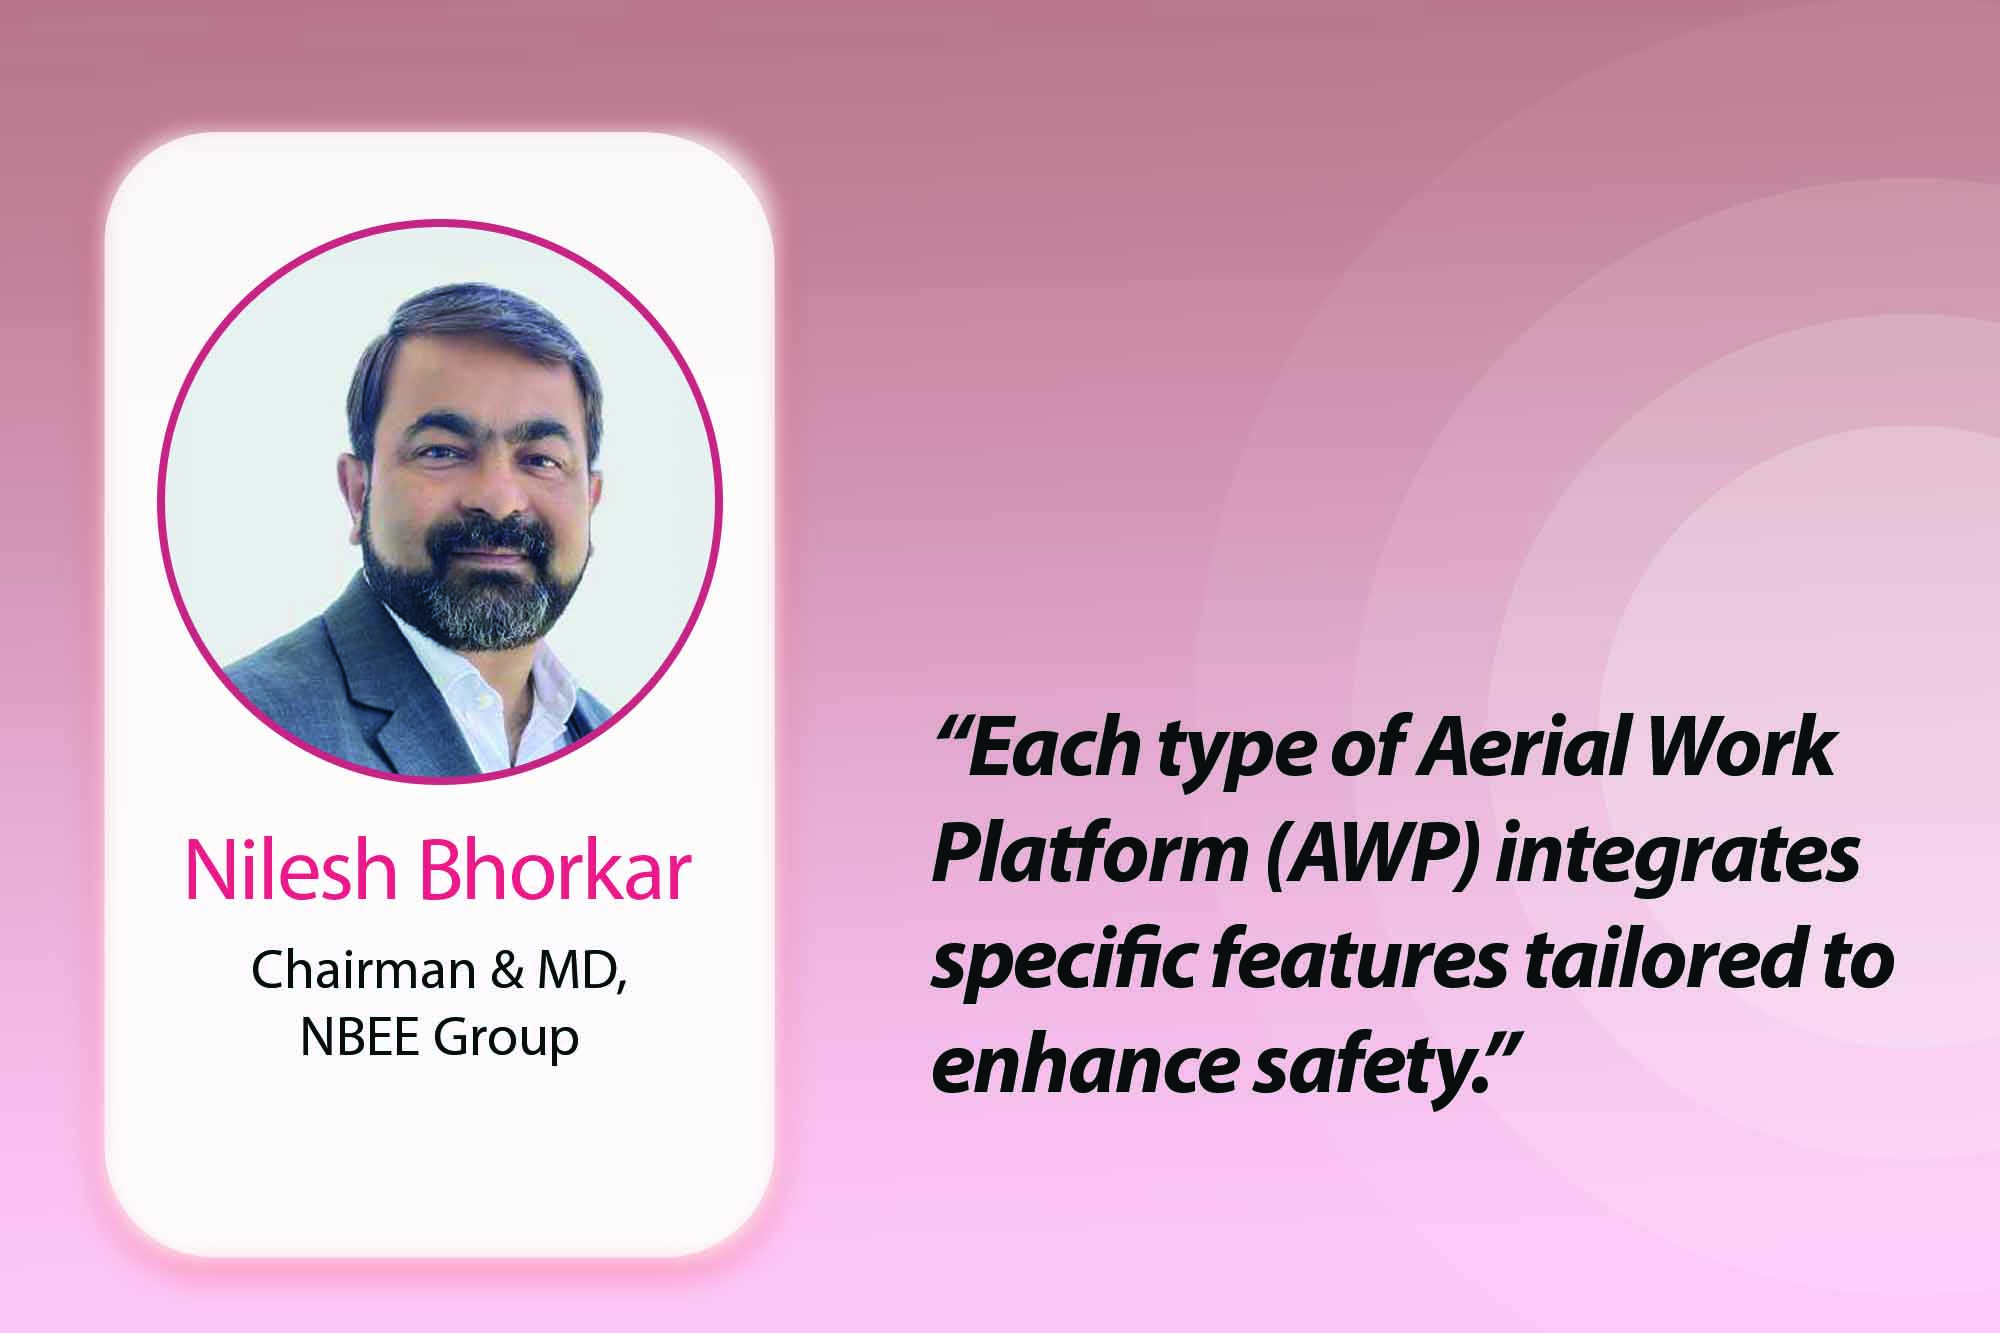 Discover how Aerial Work Platforms (AWPs) prioritise safety at every step, empowering the workforce to ascend confidently.